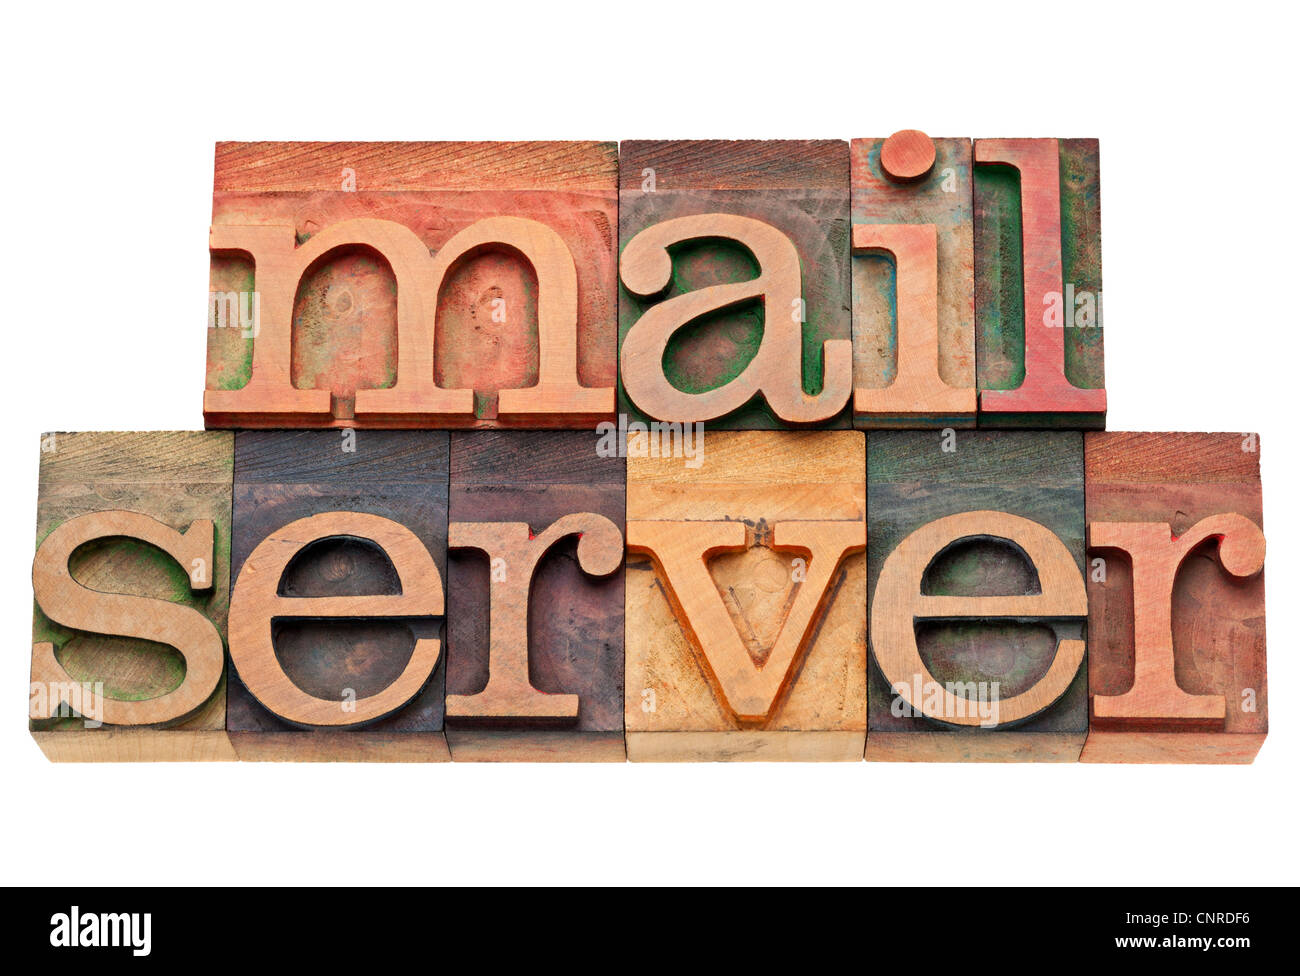 mail server - internet and computer concept - isolated text in vintage letterpress wood type Stock Photo